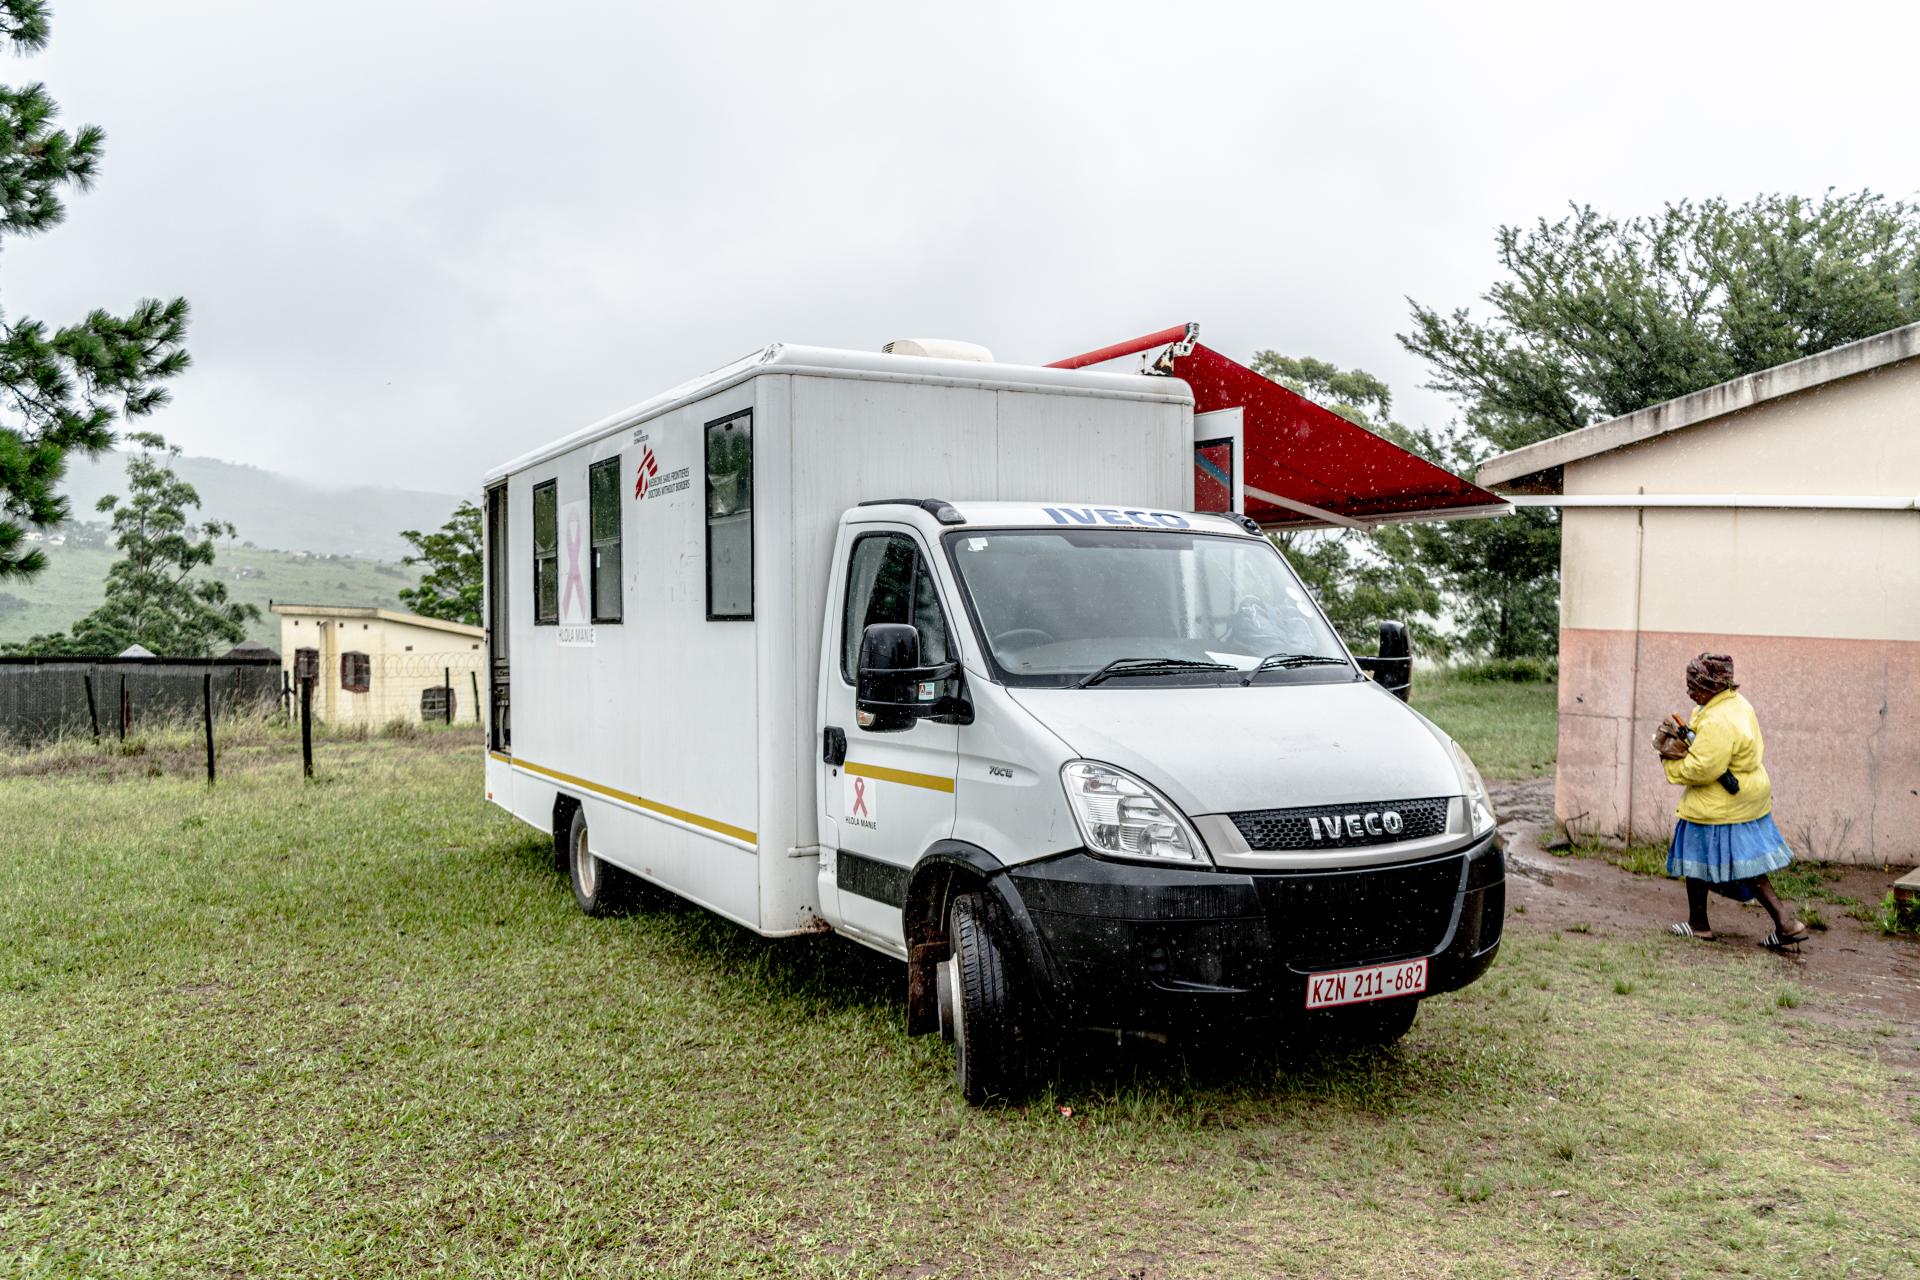 Doctors Without Borders/MSF KZN Eshowe TB project, South Africa